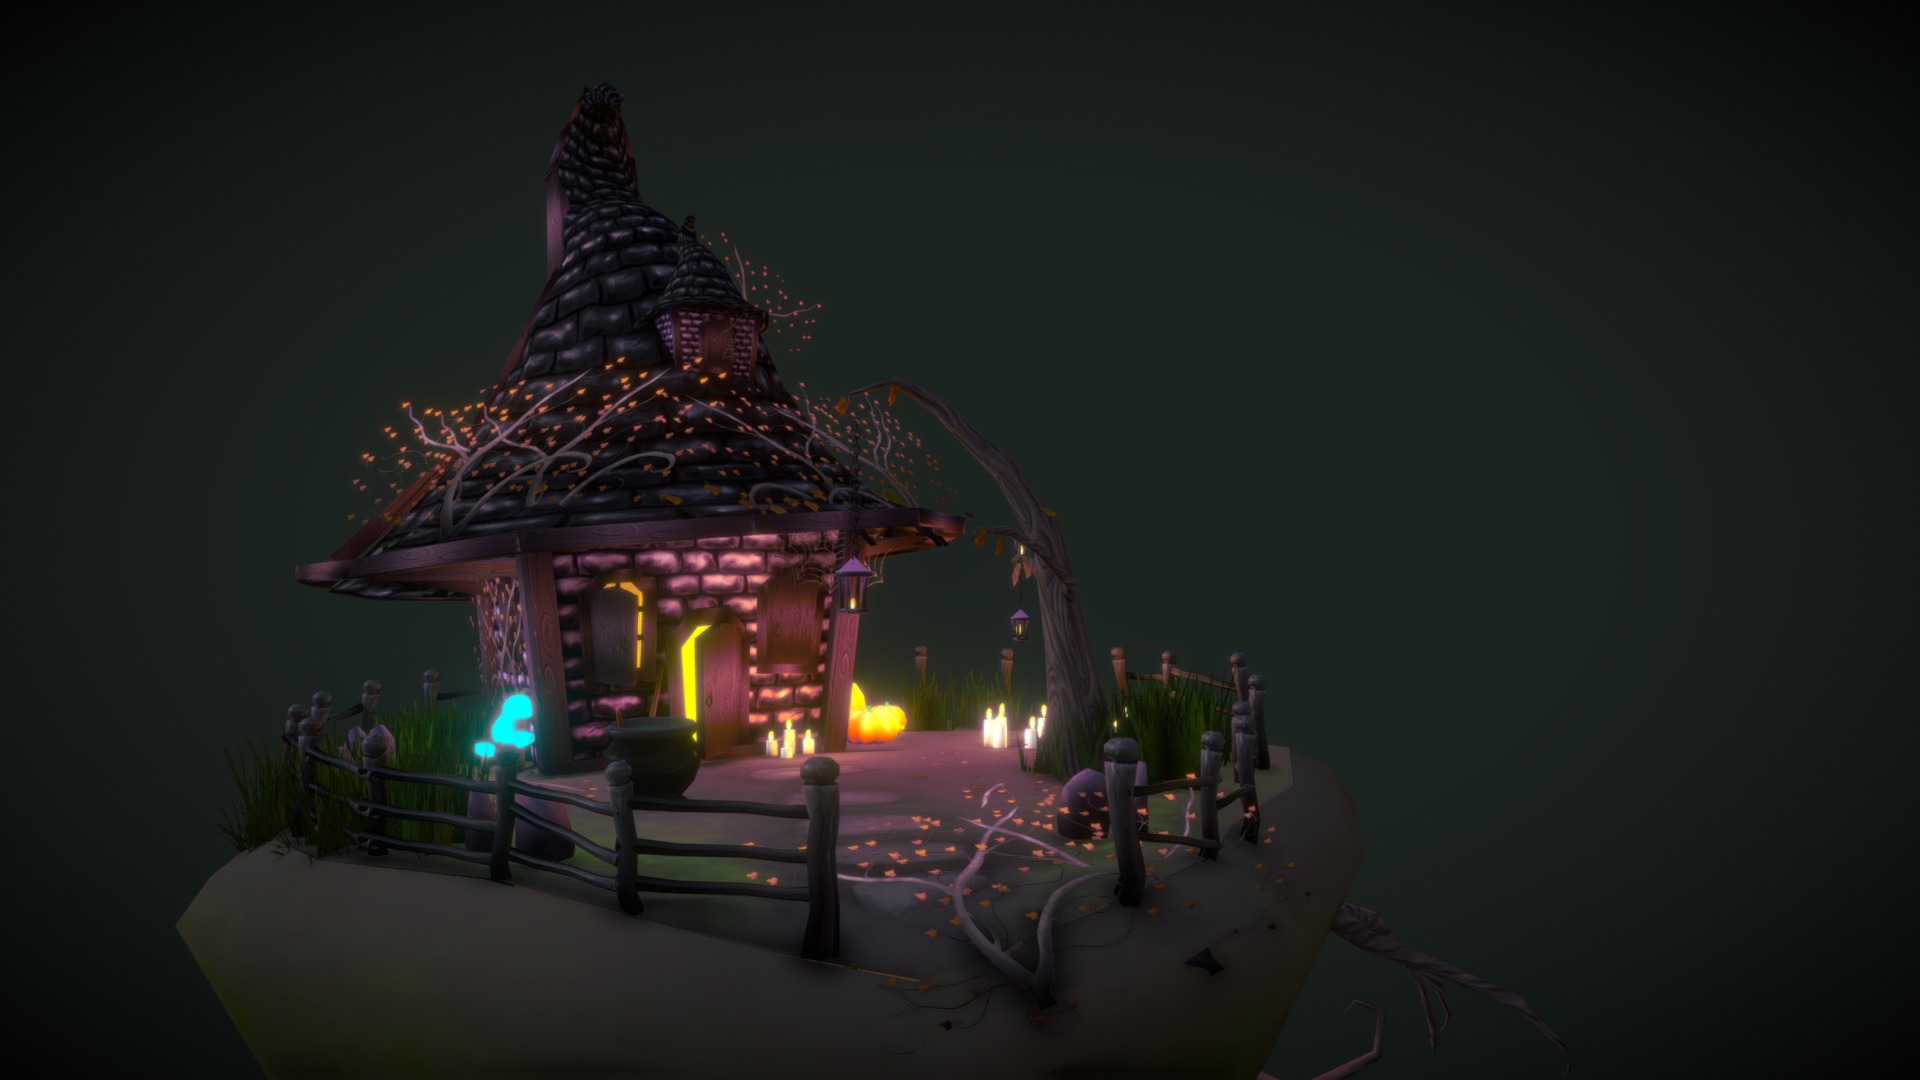 This is a short project I wanted to make since Halloween is coming up very soon! EEk! &lt;3

There's a few dodgy broken bits here and there but I'm a bit lazy ! - Witch Hut! - 3D model by CPU_Livy 3d model